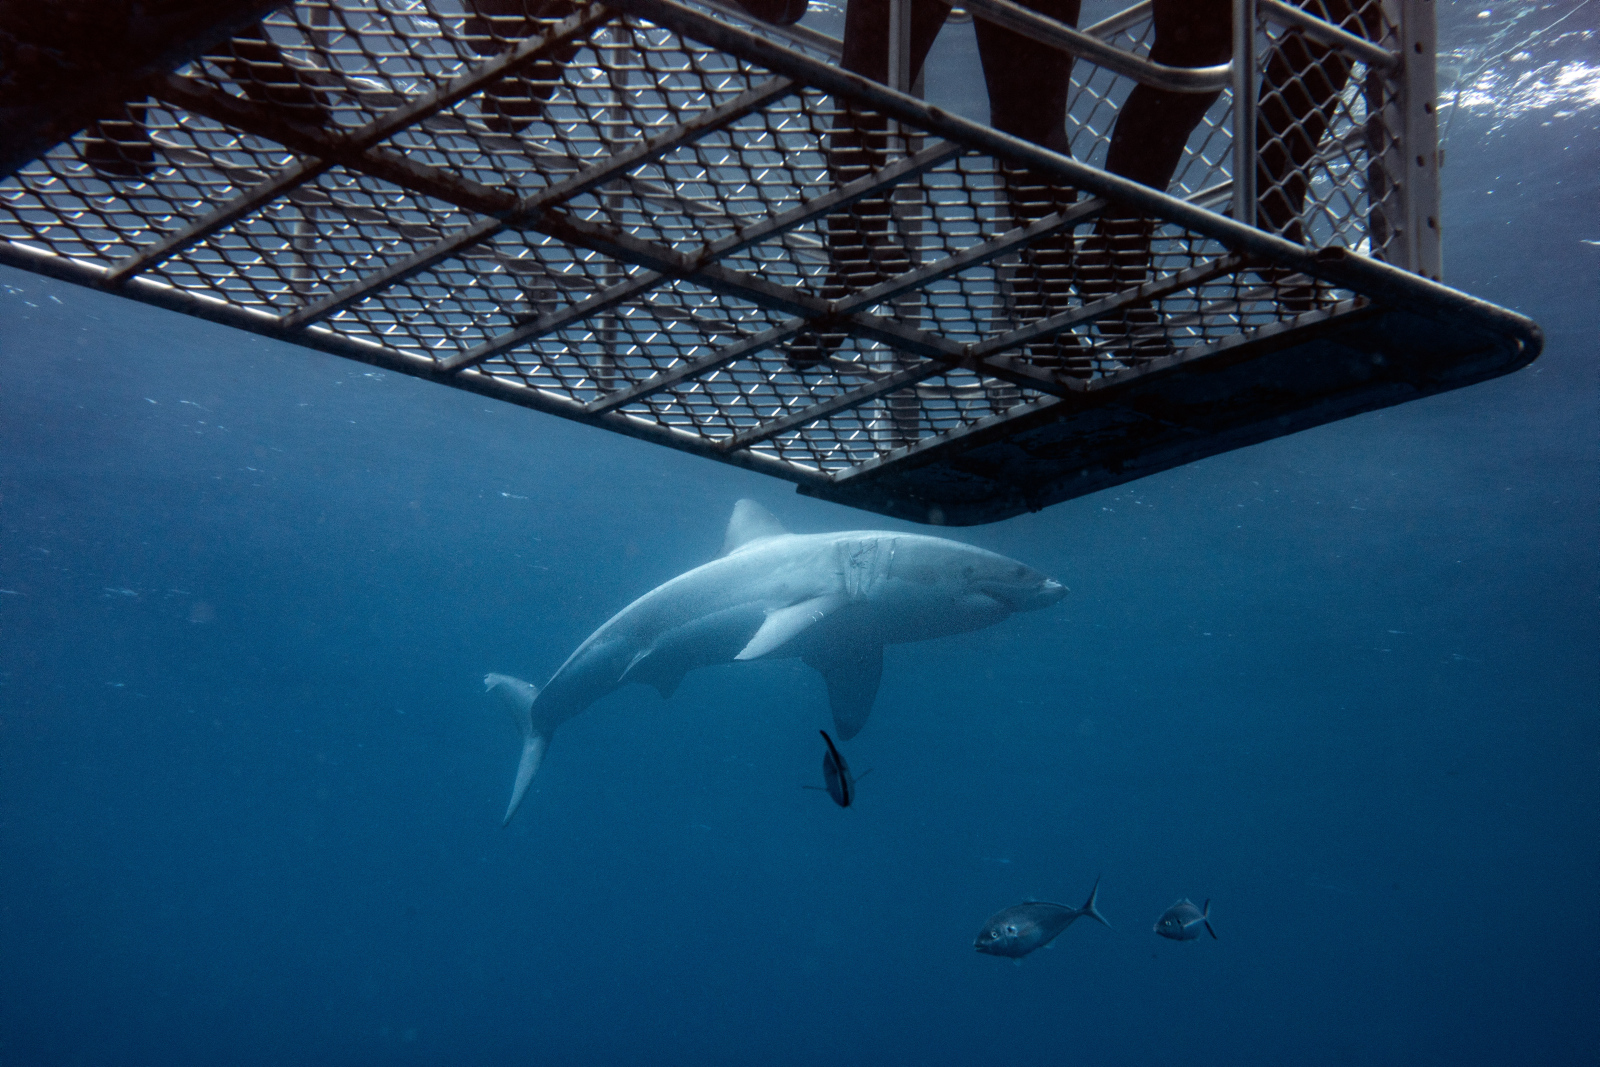 Divers in the safety of a shark cage view a Great White Shark off Neptune Island, Eyre Peninsula